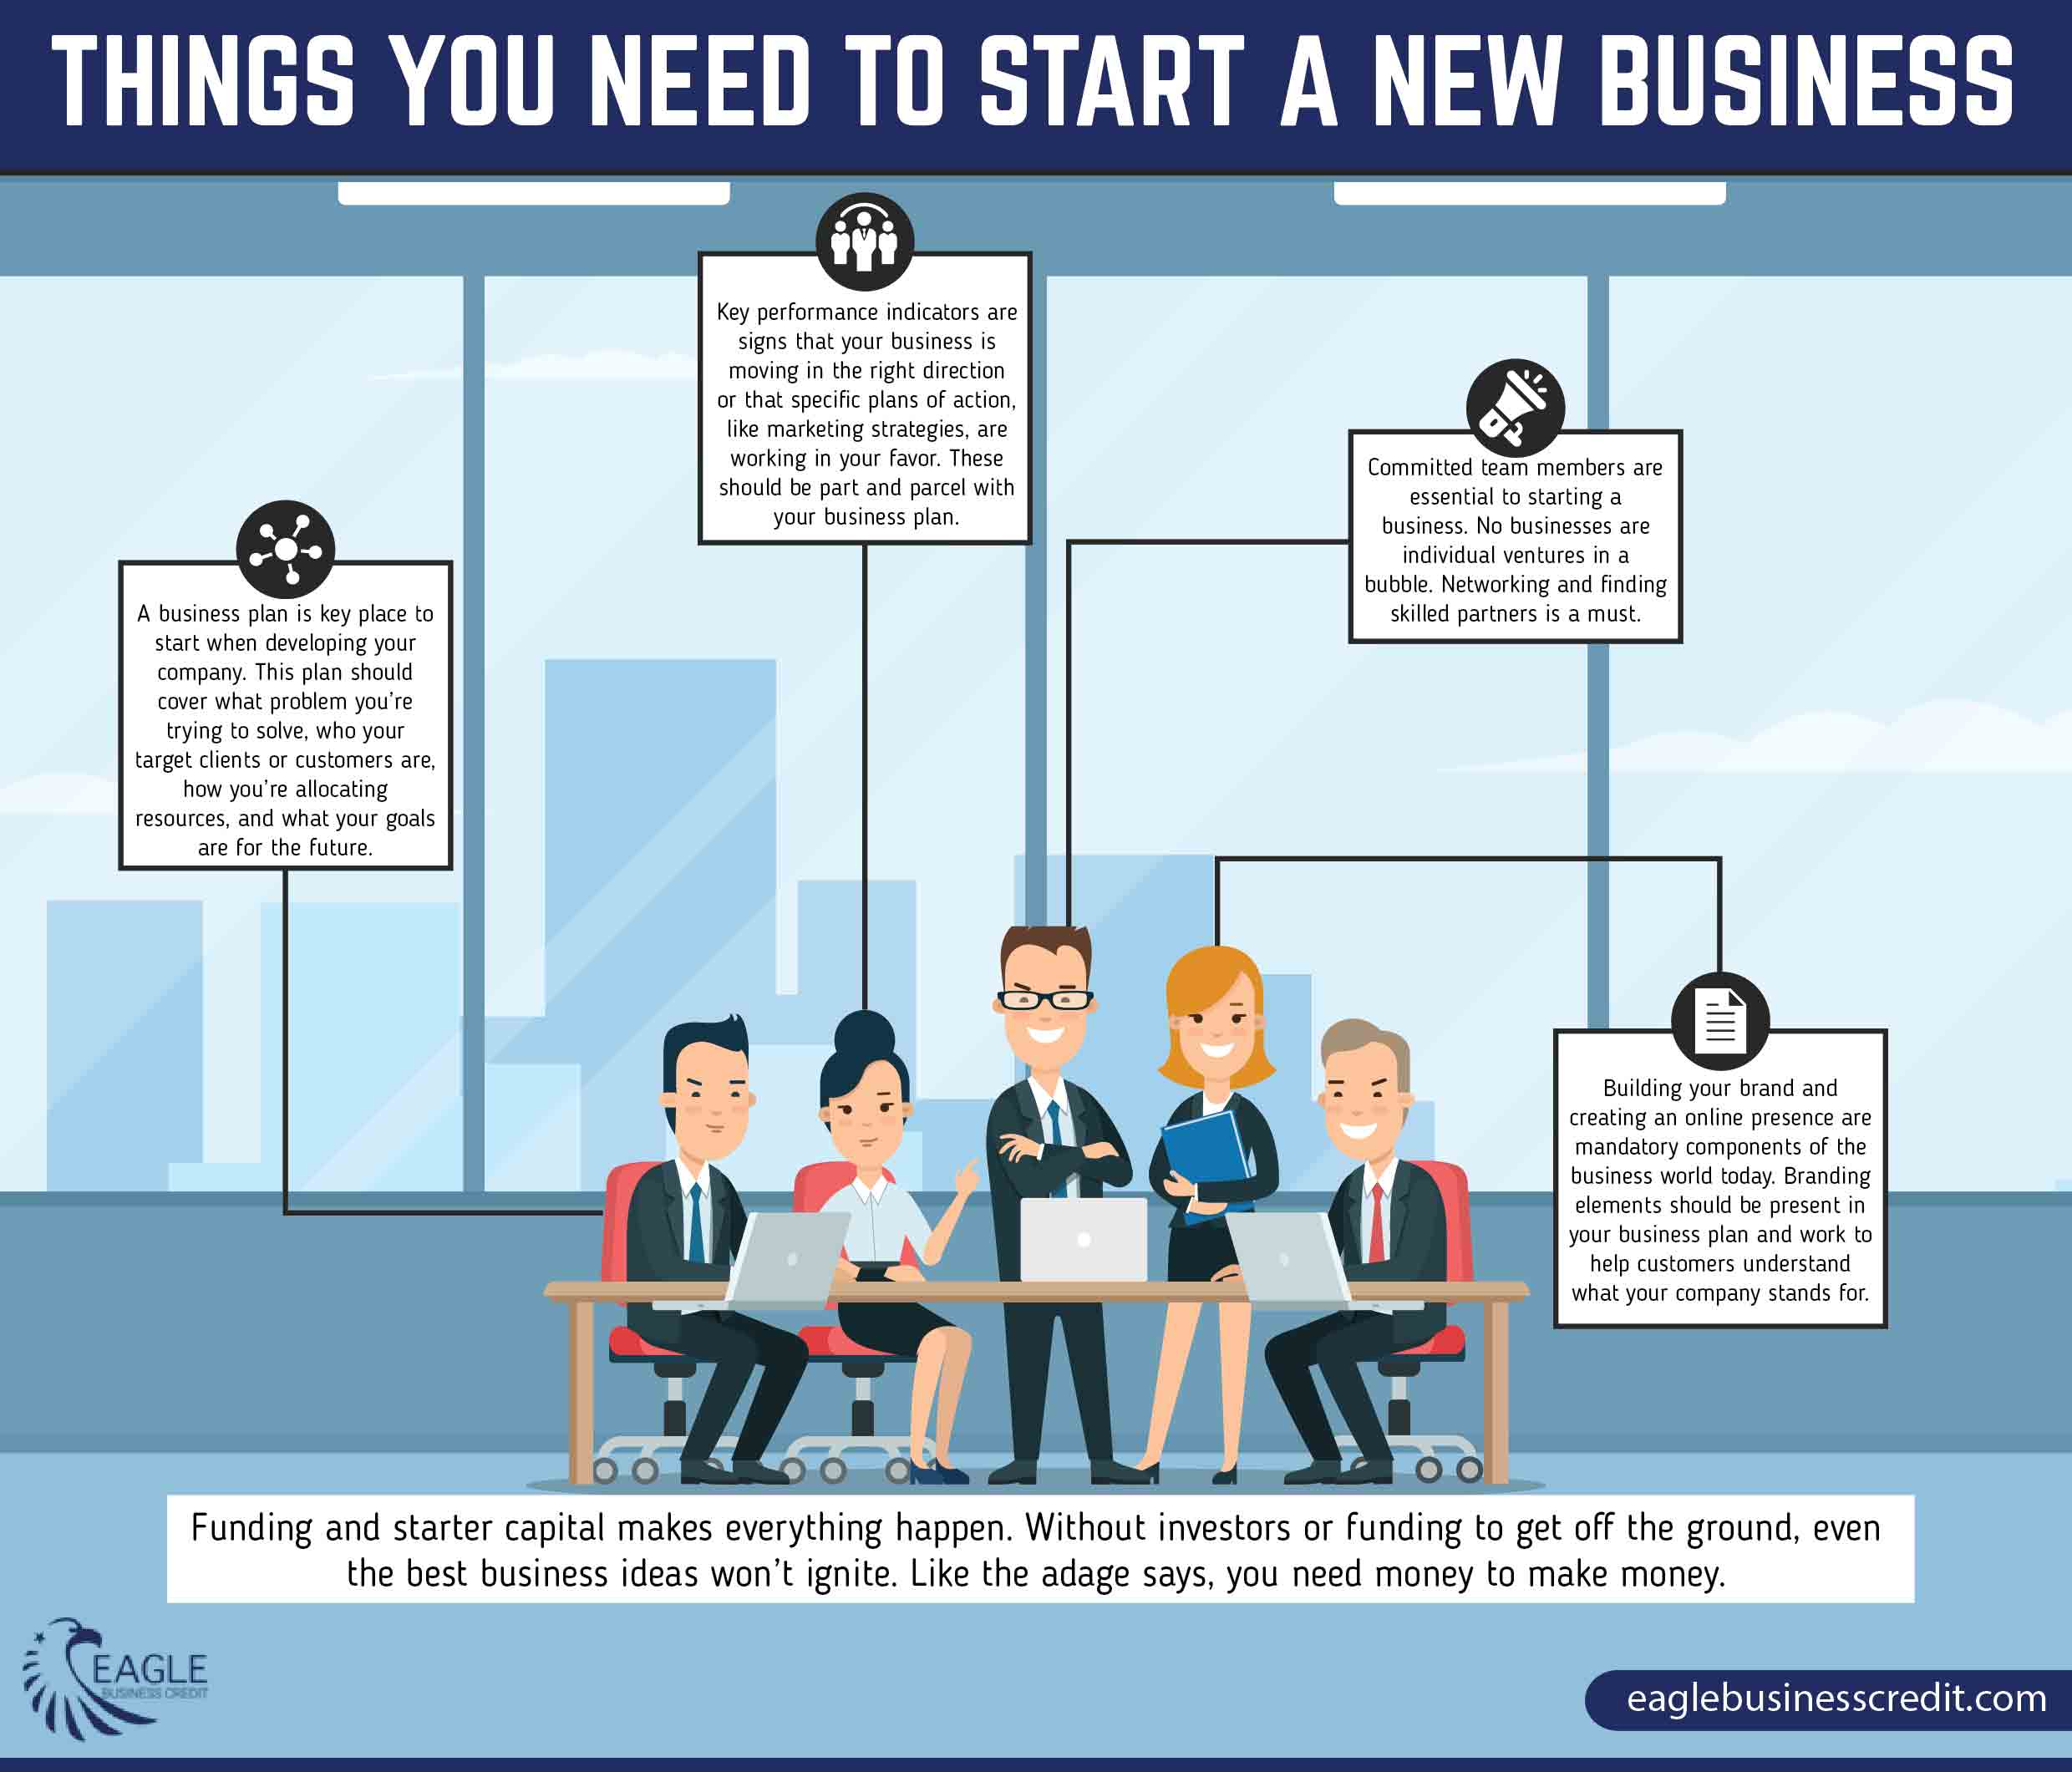 How to Get Money to Start a Business